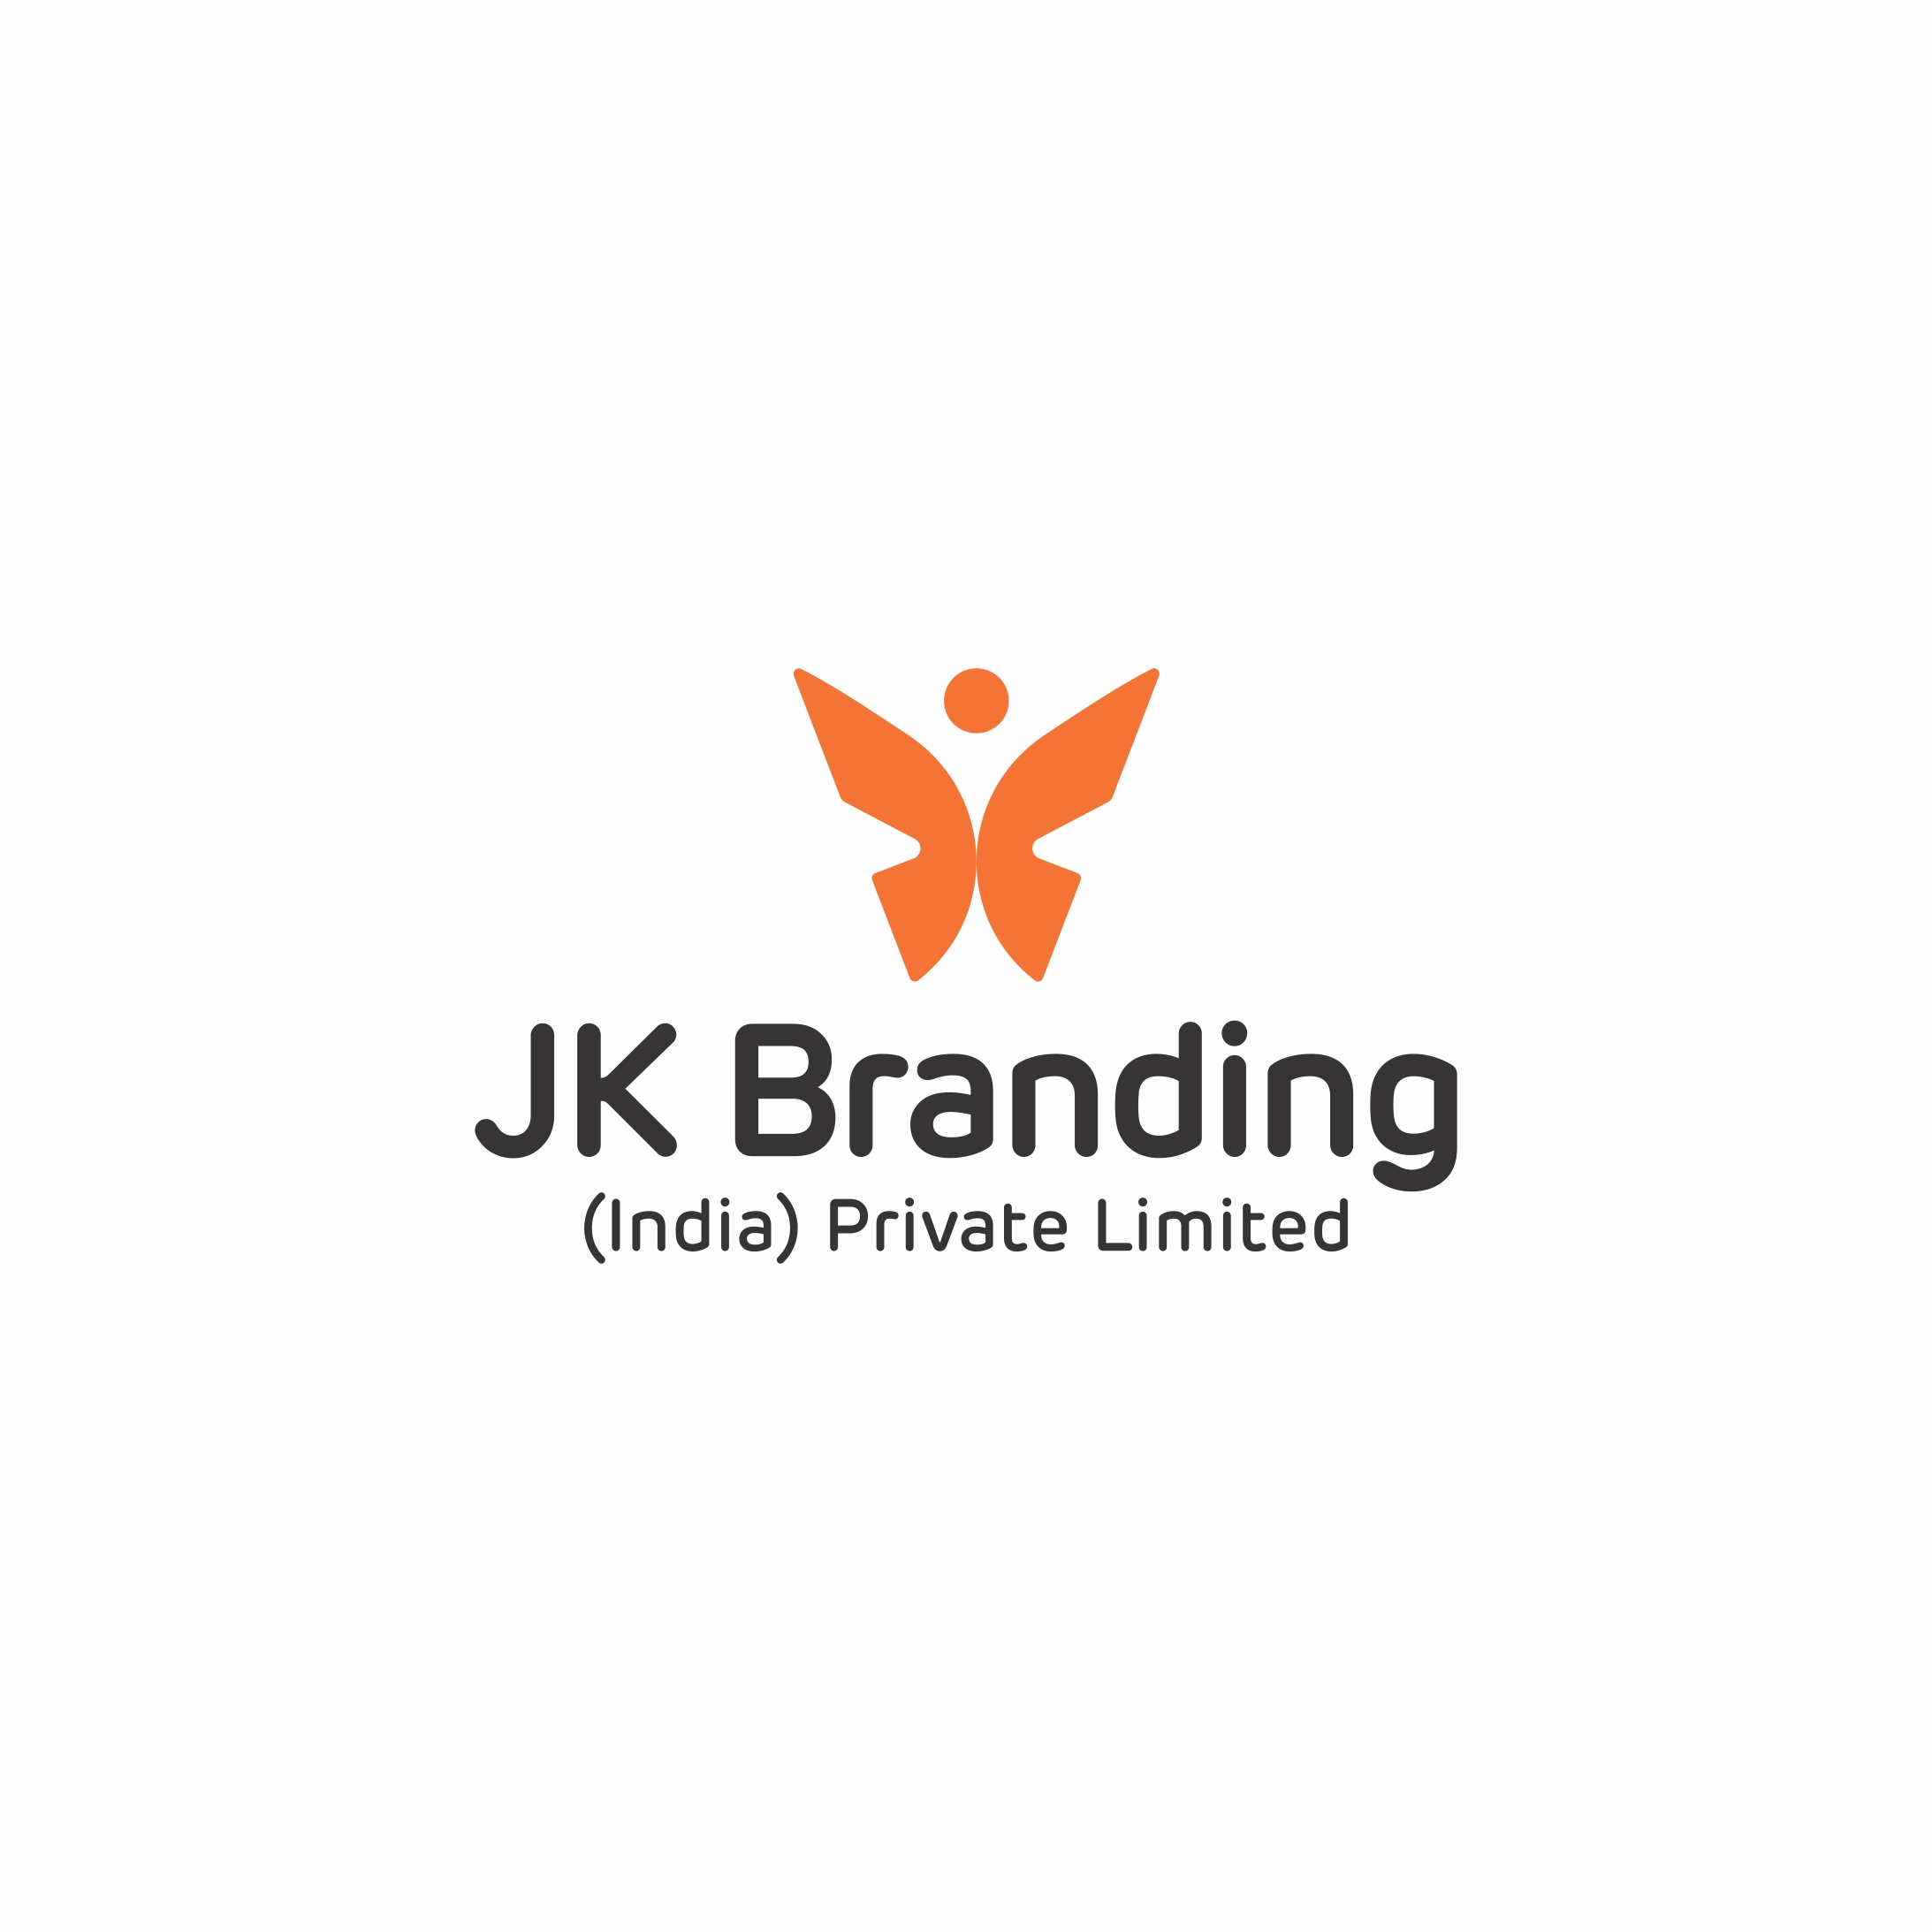 J K Branding (india) Private Limited